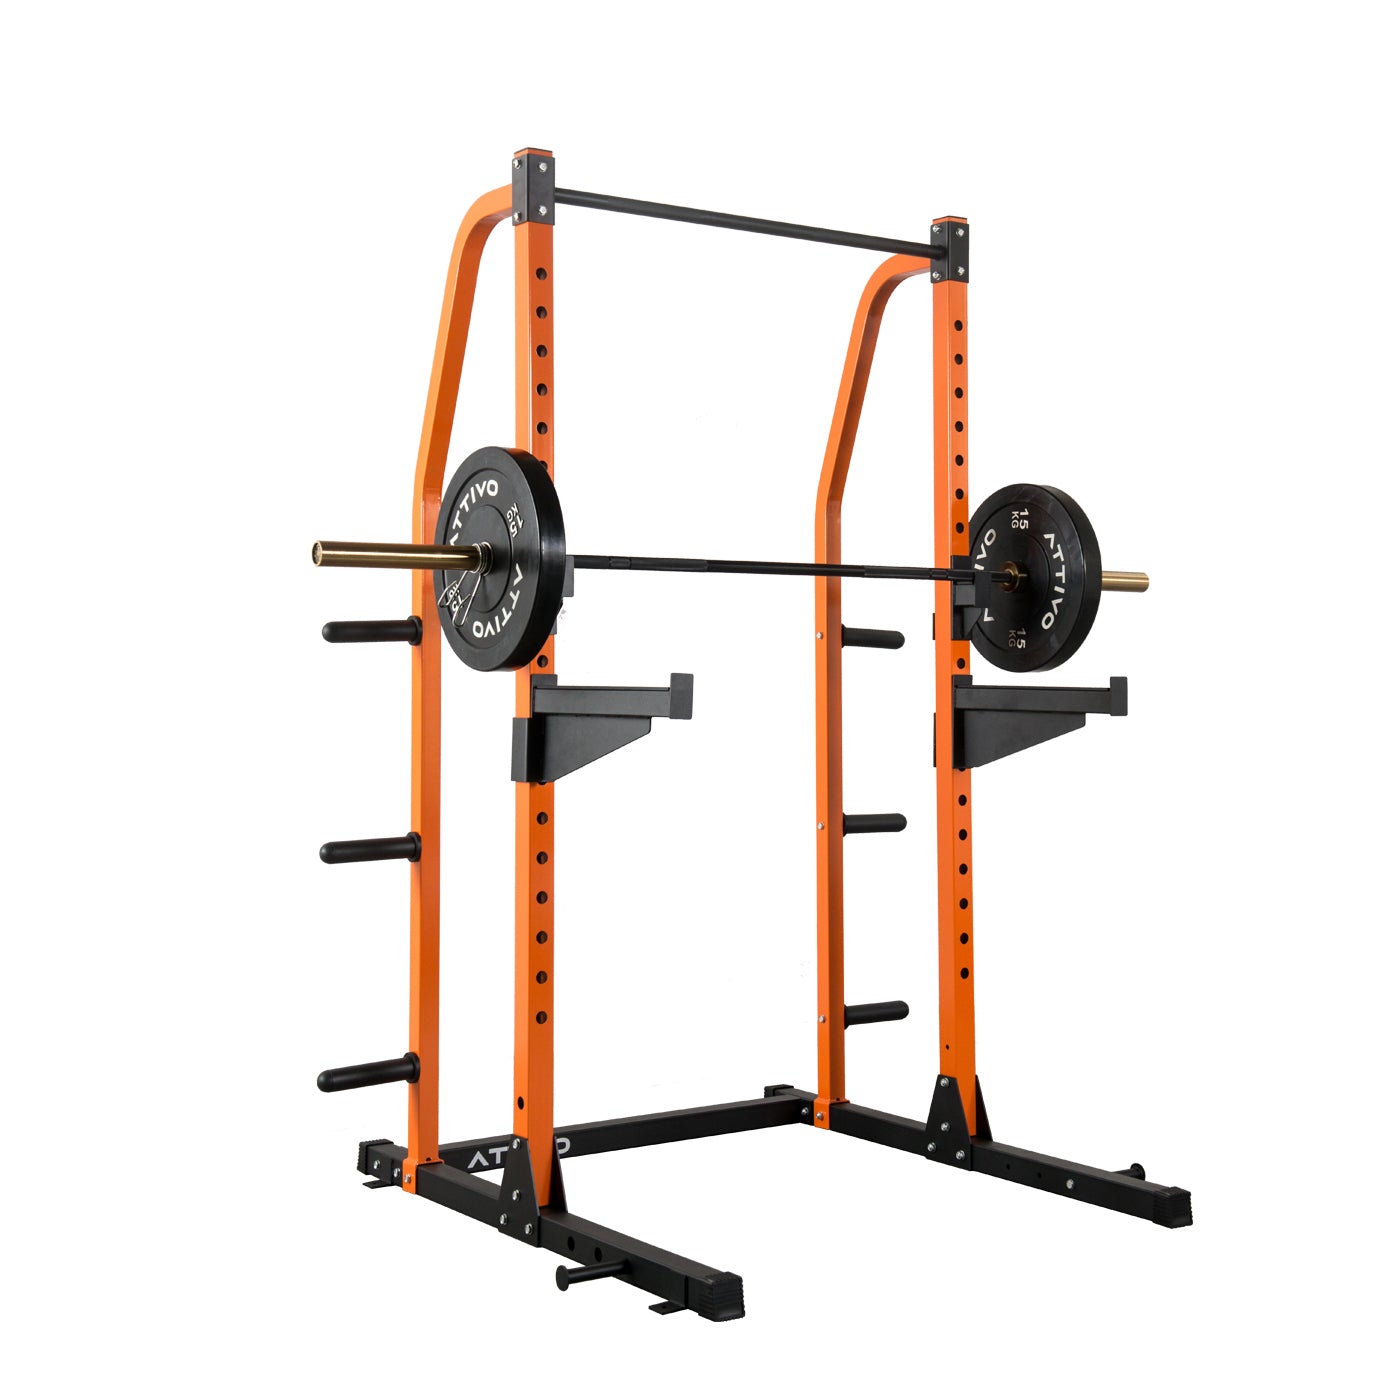 ATTIVO Half Power Rack Multi-Function Adjustable Power Cage with J-Hooks, Safety Arms - Black